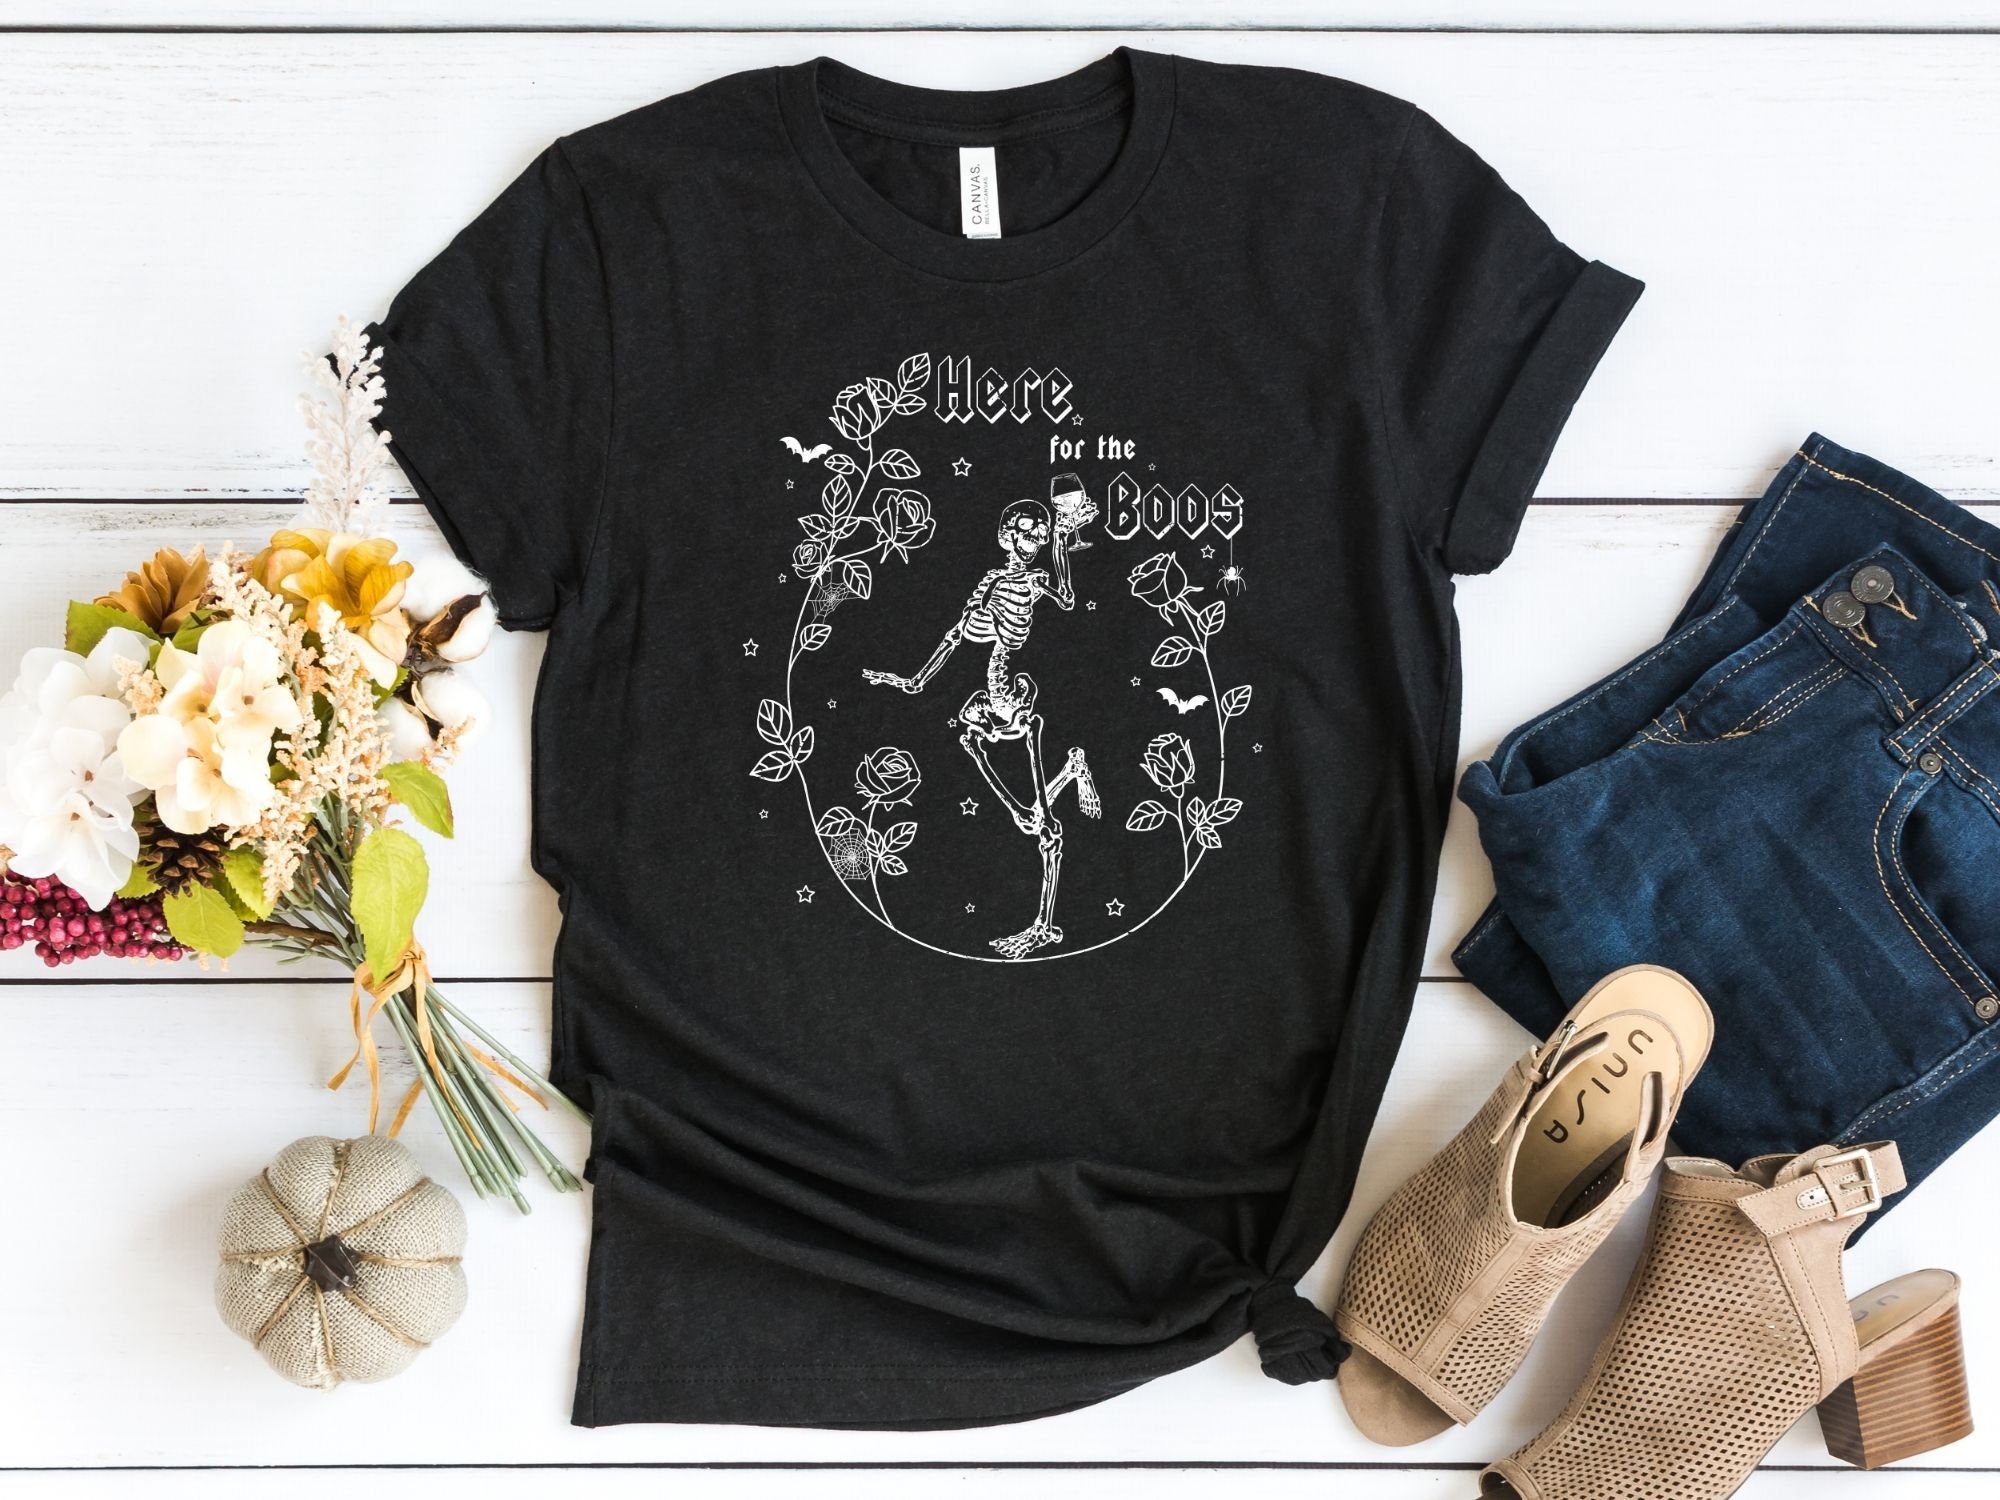 Discover Here for the Boos Halloween Shirt, Womens Halloween Shirts, Funny Halloween Tshirt, Halloween Tees Women, Drinking Skeleton Shirt, Plus Size